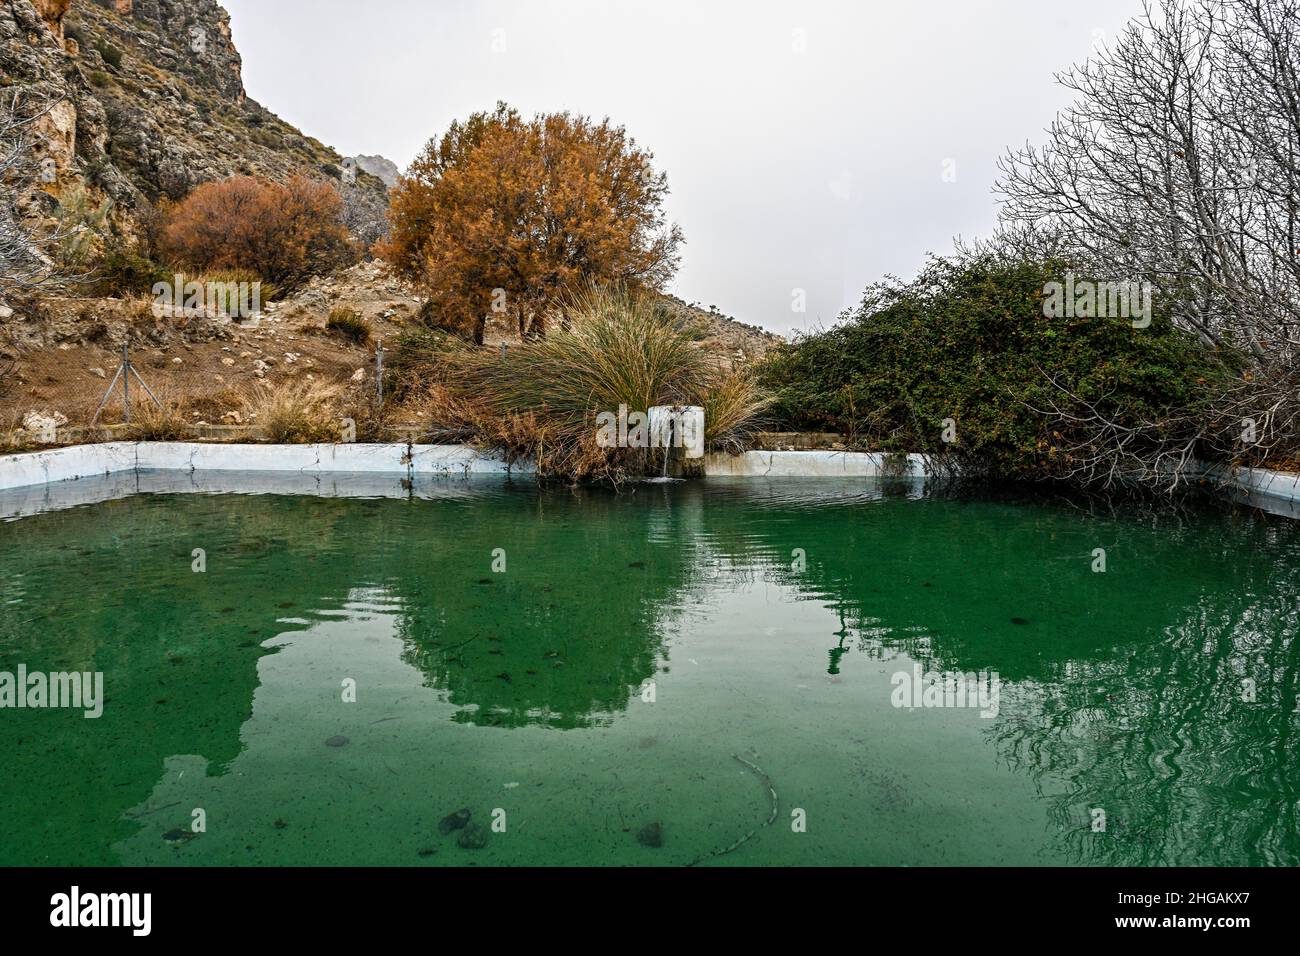 Pool or pond of water for irrigation in Granada, Andalusia Stock Photo